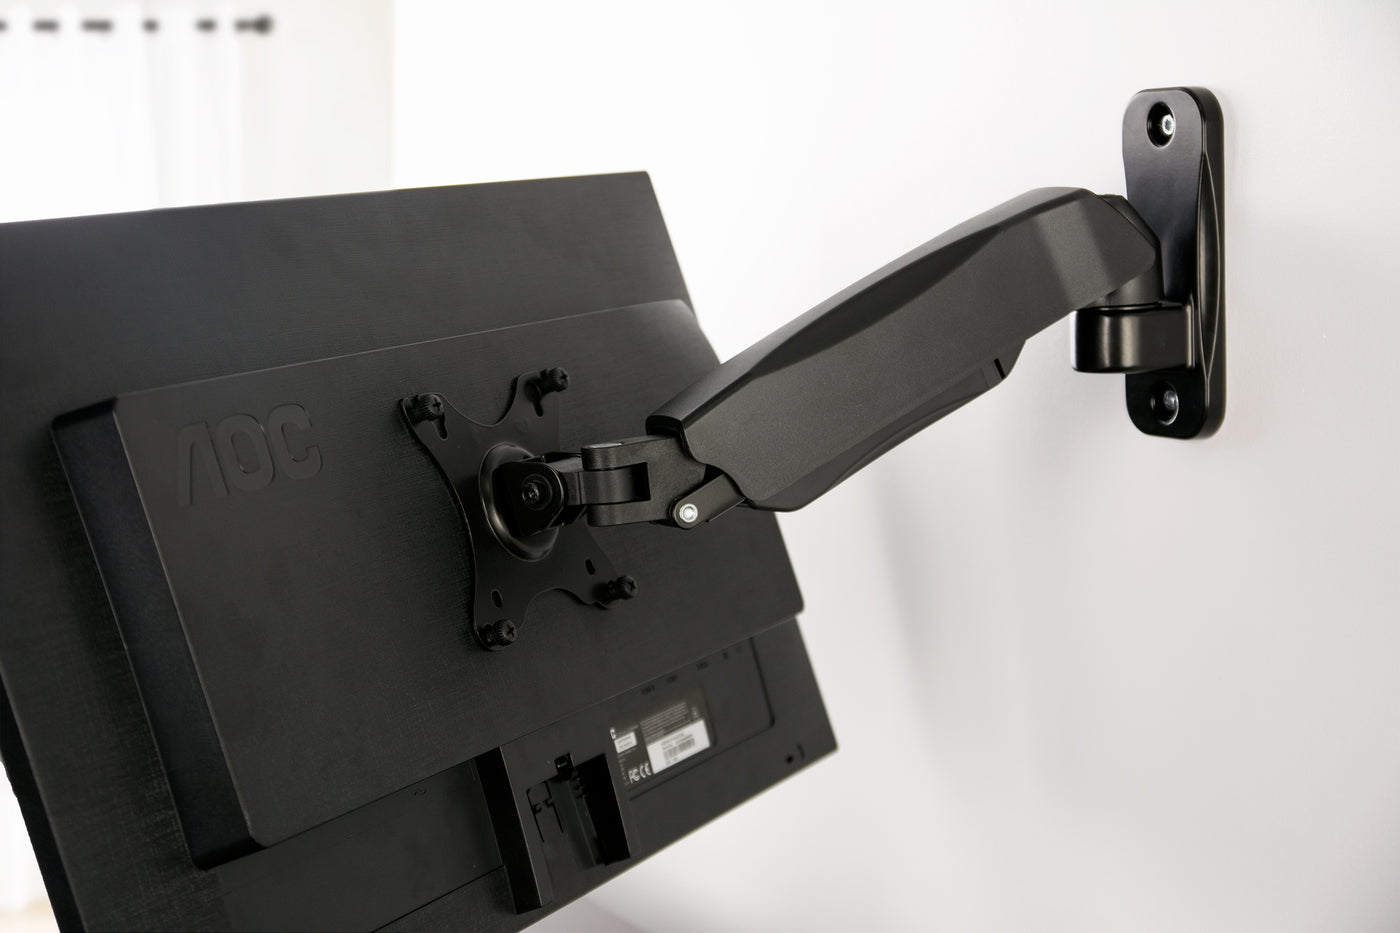 Solid structure of steel frame and VESA bracket plate to securely support your monitor.